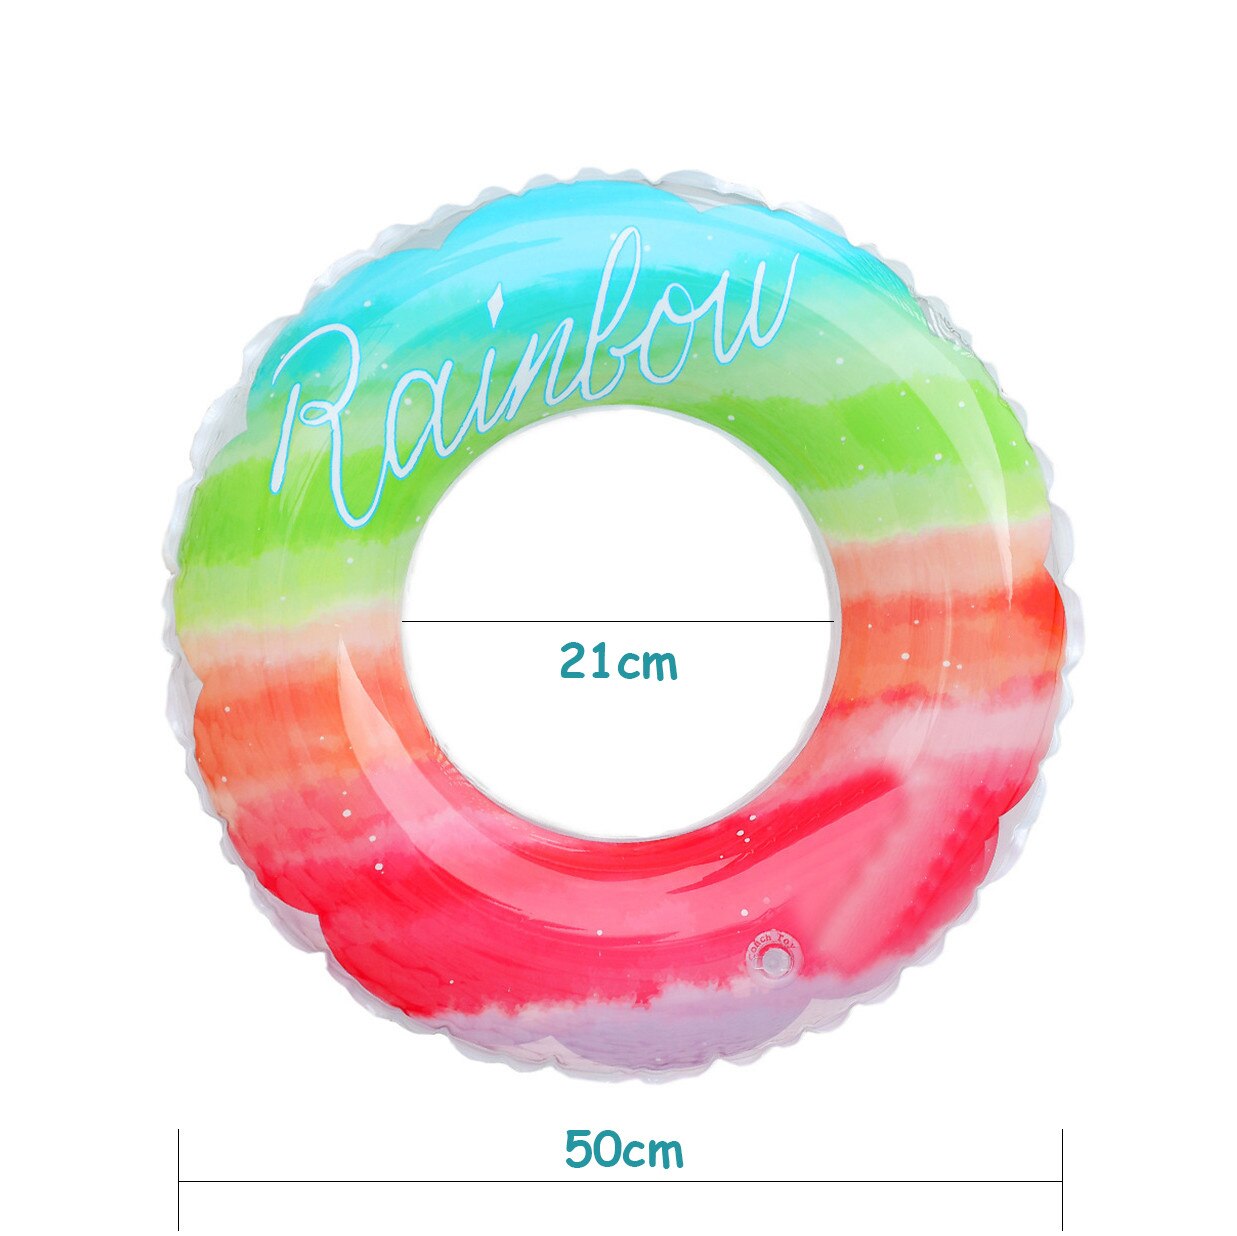 Kids Baby Summer Beach Inflatable Ring Floating Swim Ring Water Toy Rainbow Colorful Safety Swimming Rings For Pool River Beach: 2-4 Years